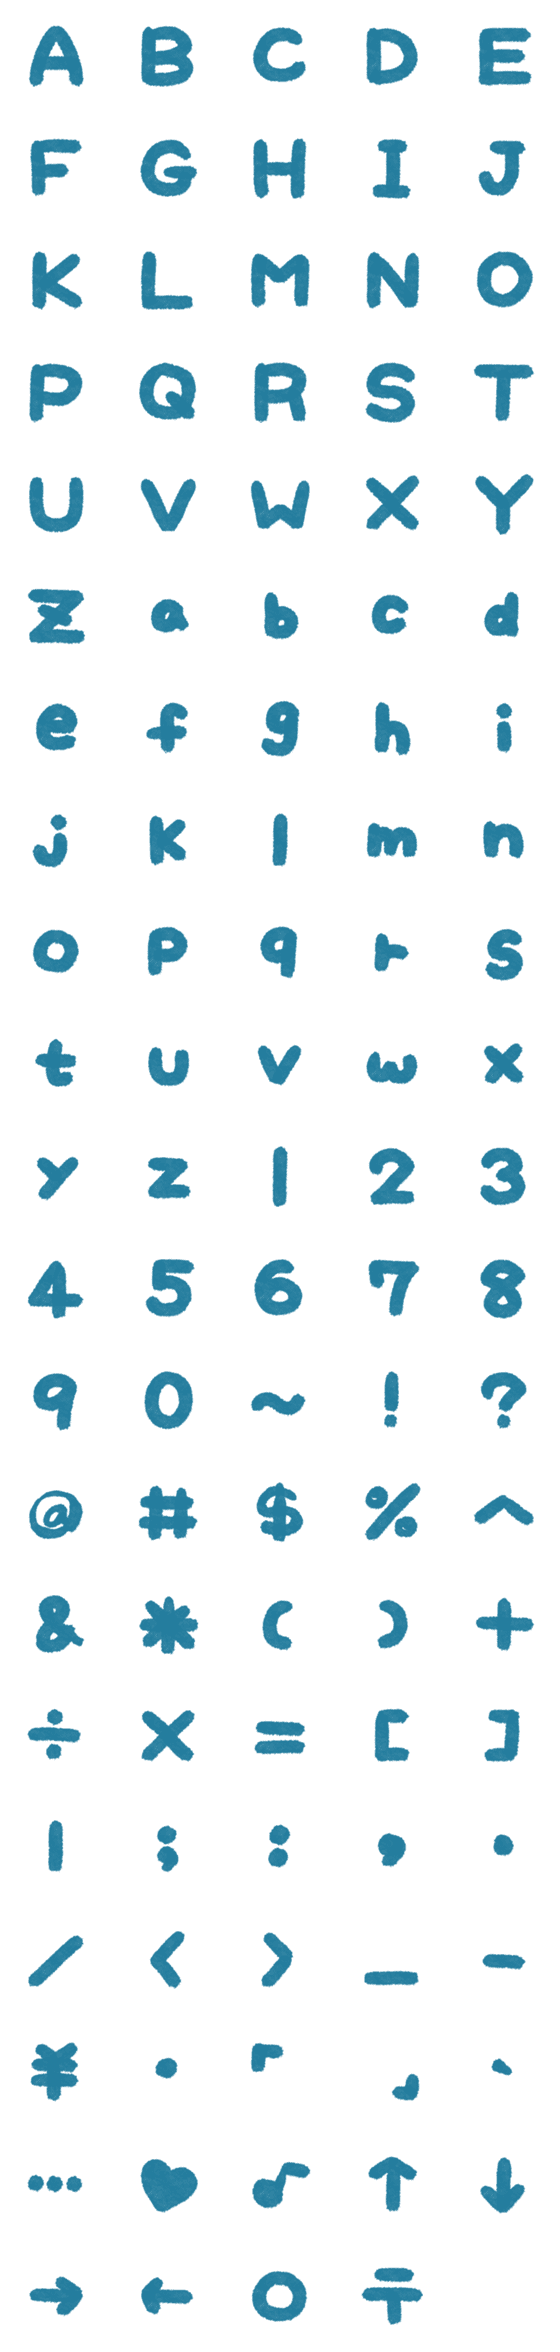 [LINE絵文字]SEATTLE SPRUCE Letter number symbols2の画像一覧